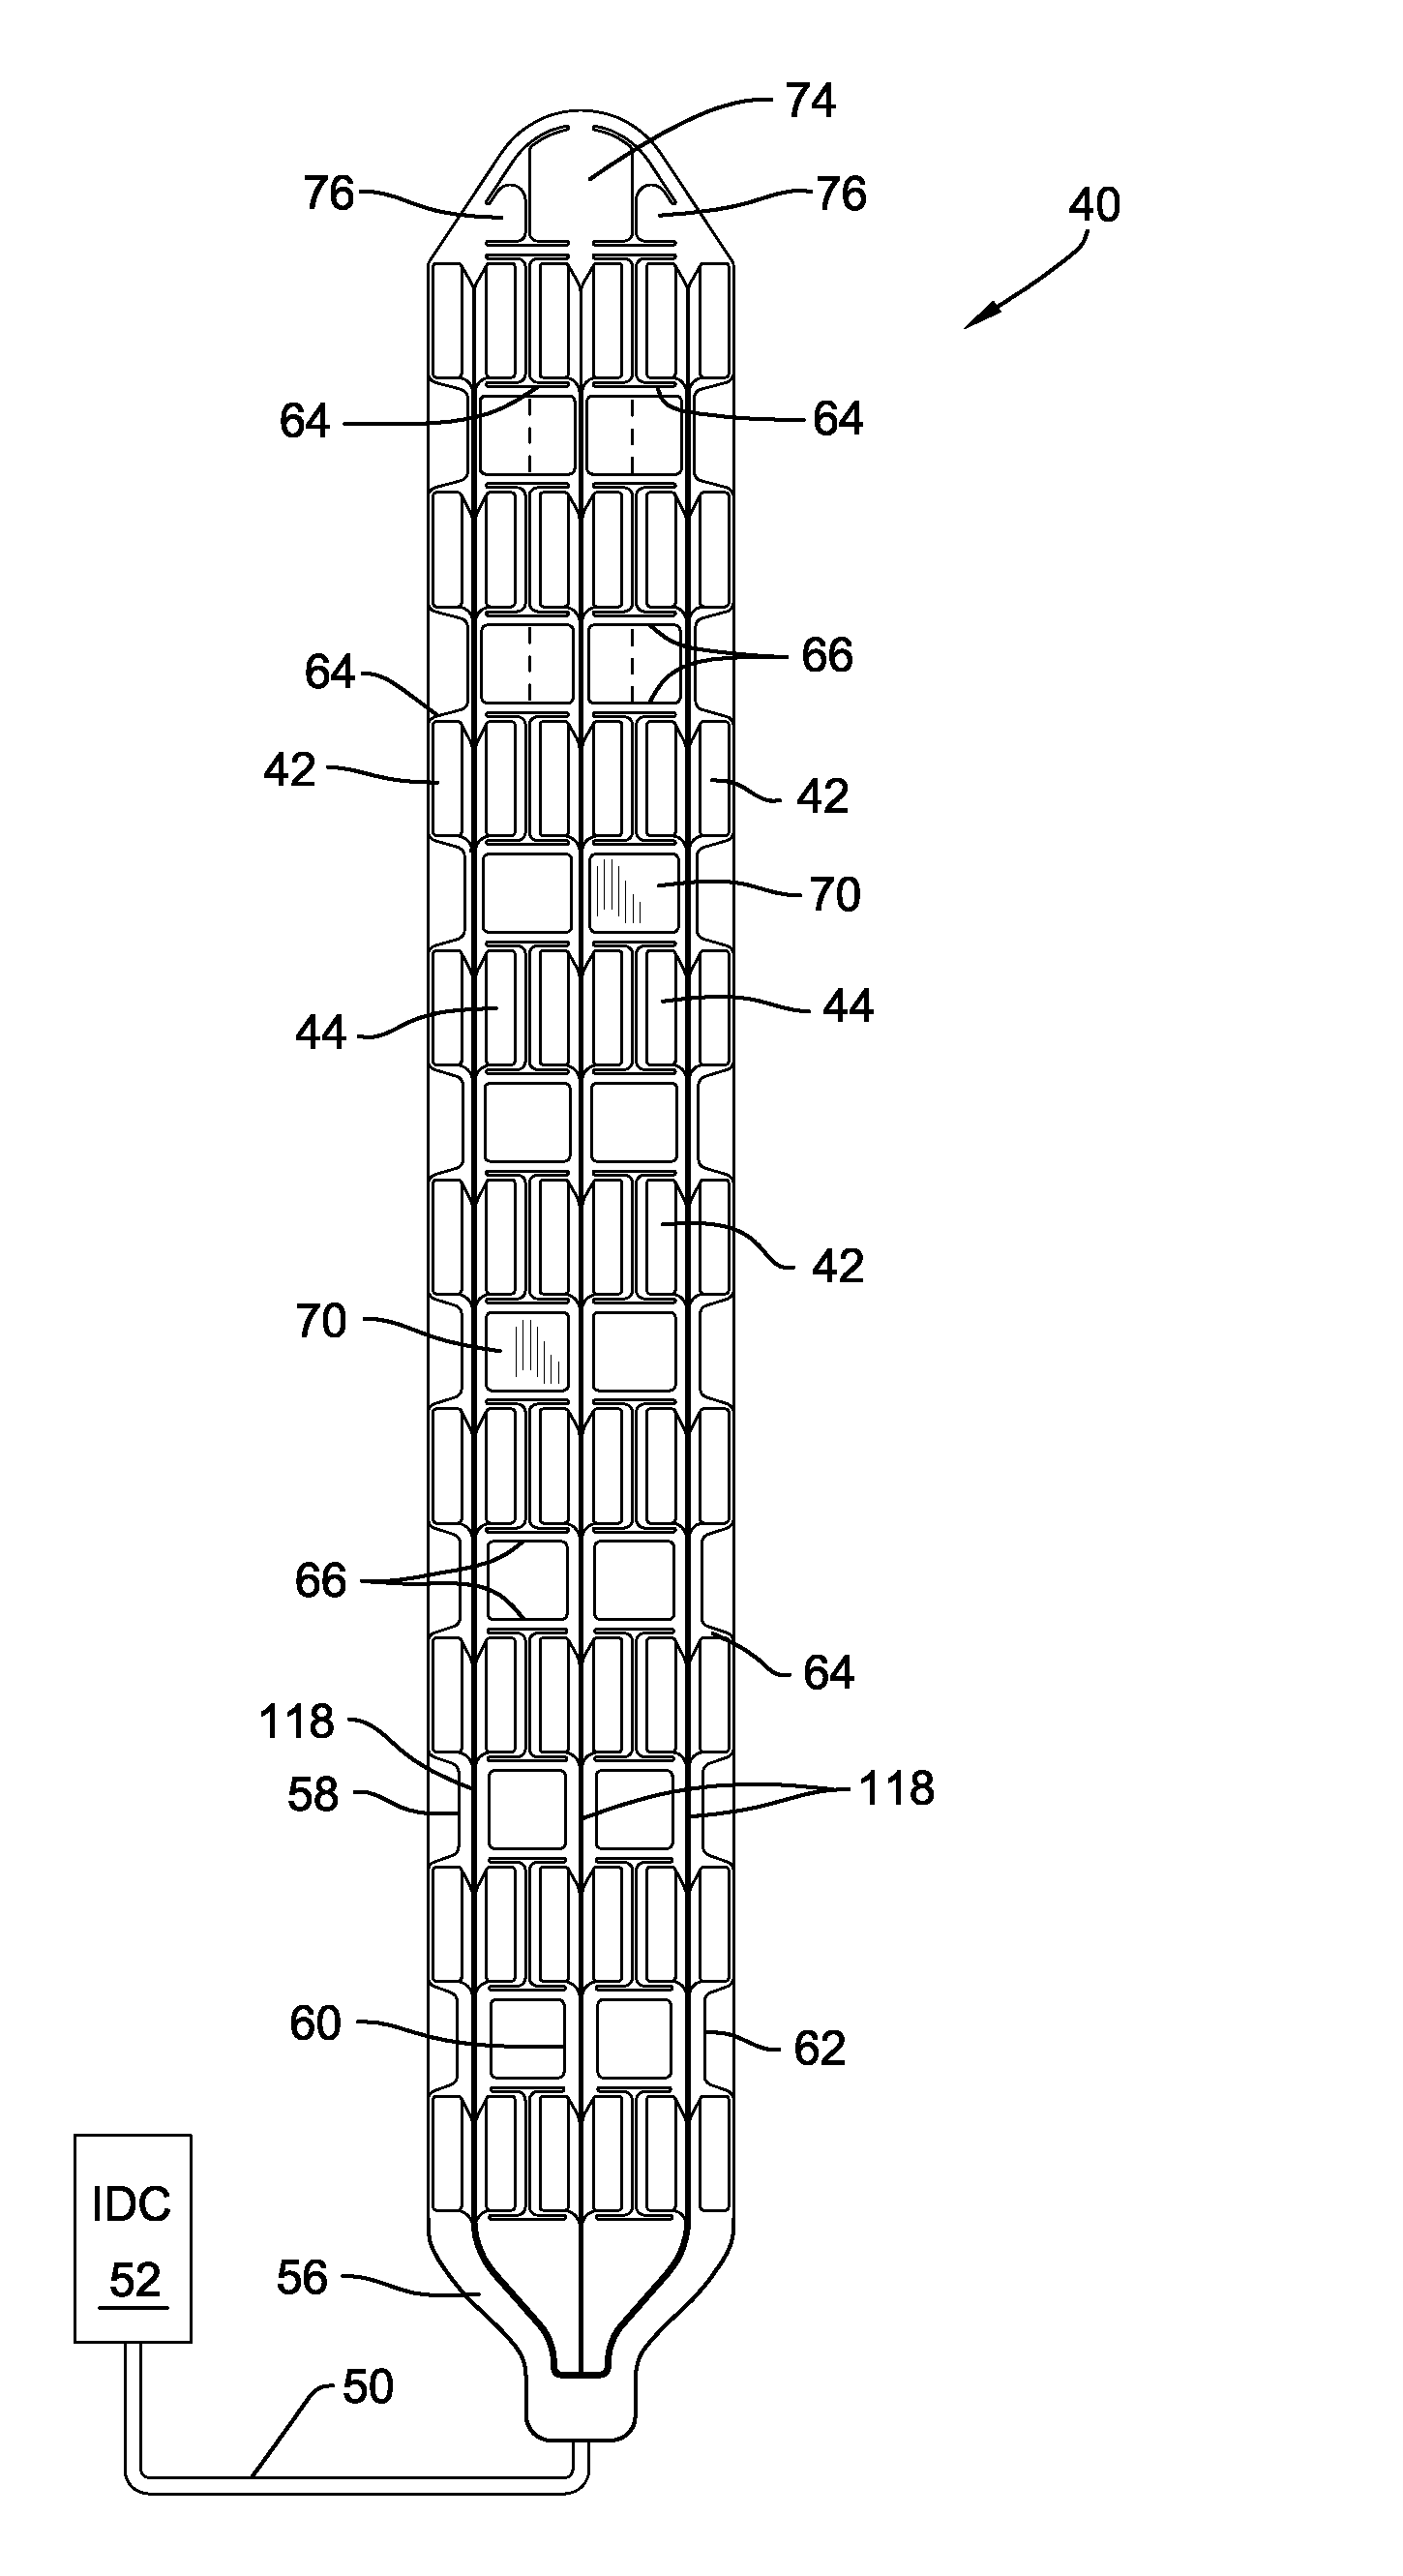 Implantable electrode array assembly including a carrier for supporting the electrodes and control modules for regulating operation of the electrodes embedded in the carrier, and method of making same